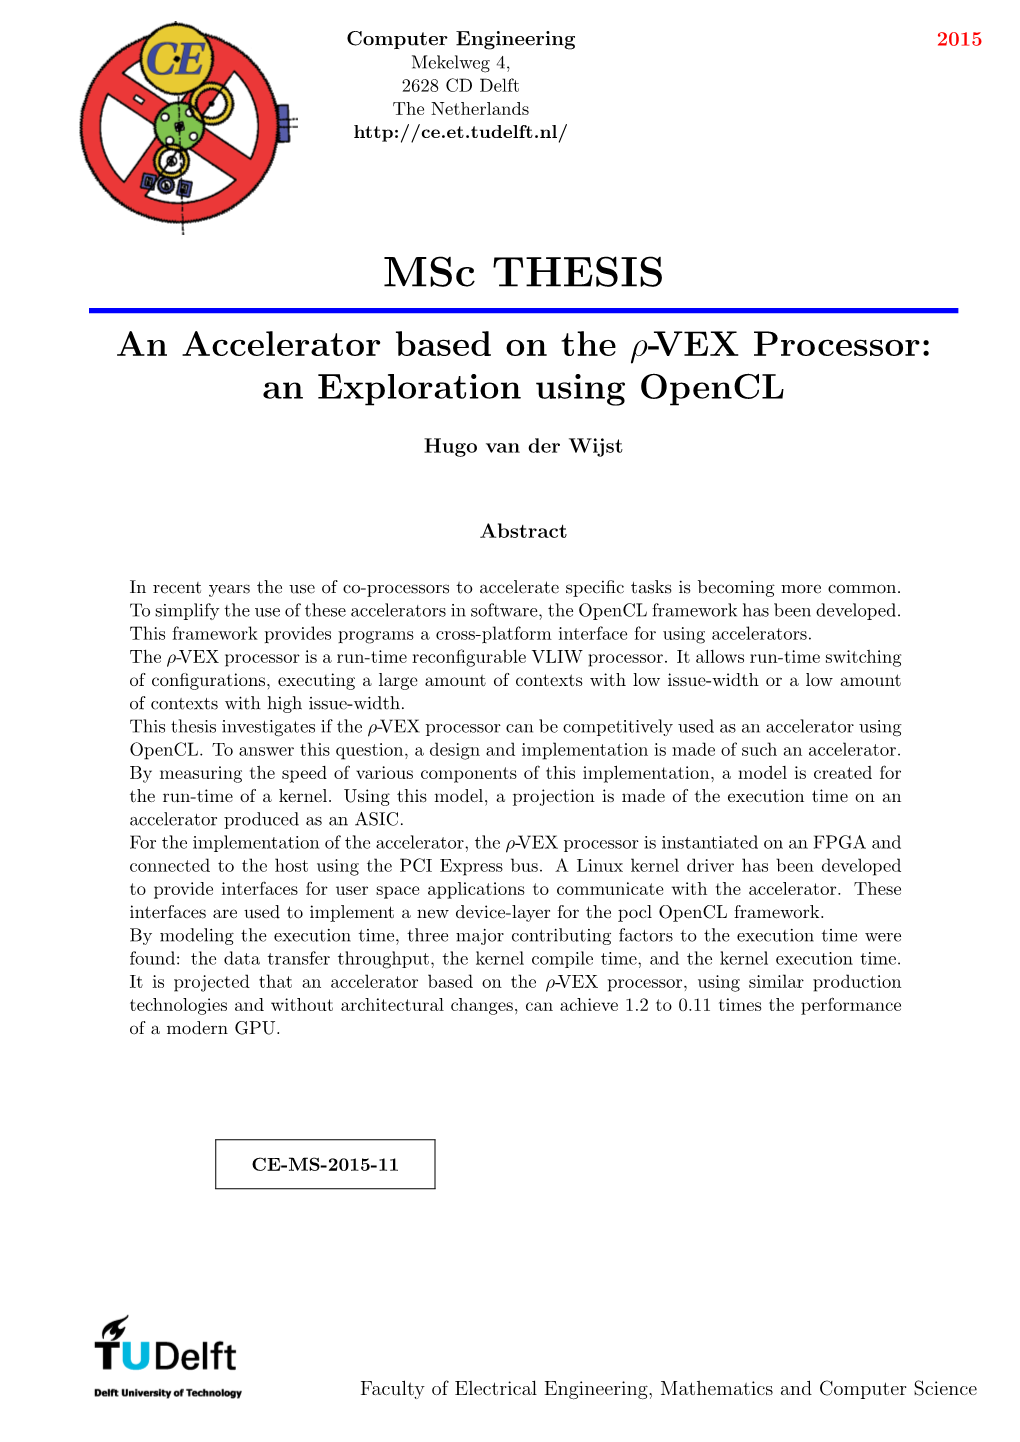 Msc THESIS an Accelerator Based on the Ρ-VEX Processor: an Exploration Using Opencl